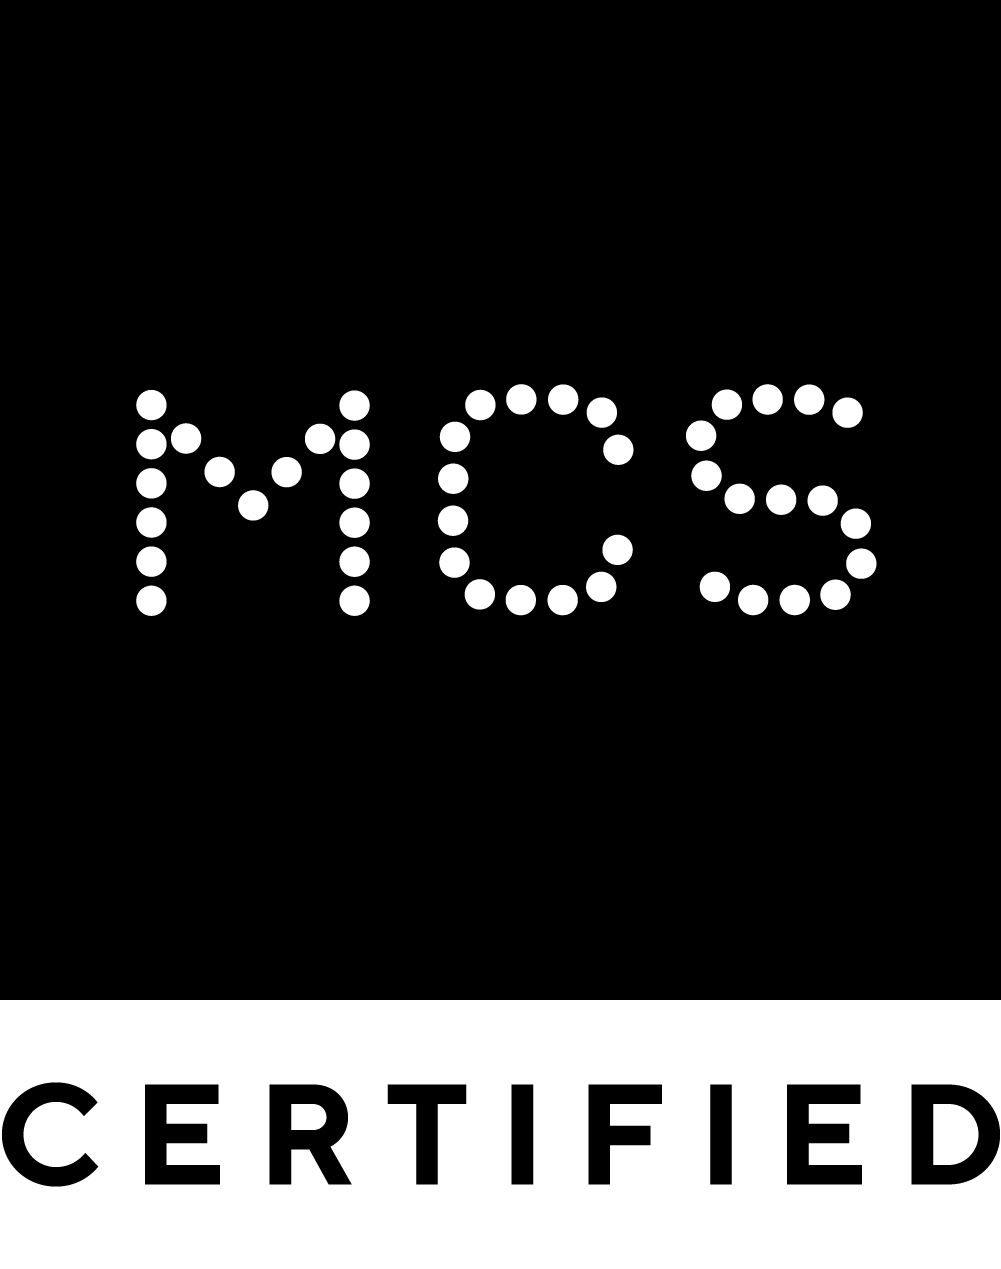 https://valley-group.com/wp-content/uploads/2022/08/MCSCertified.png